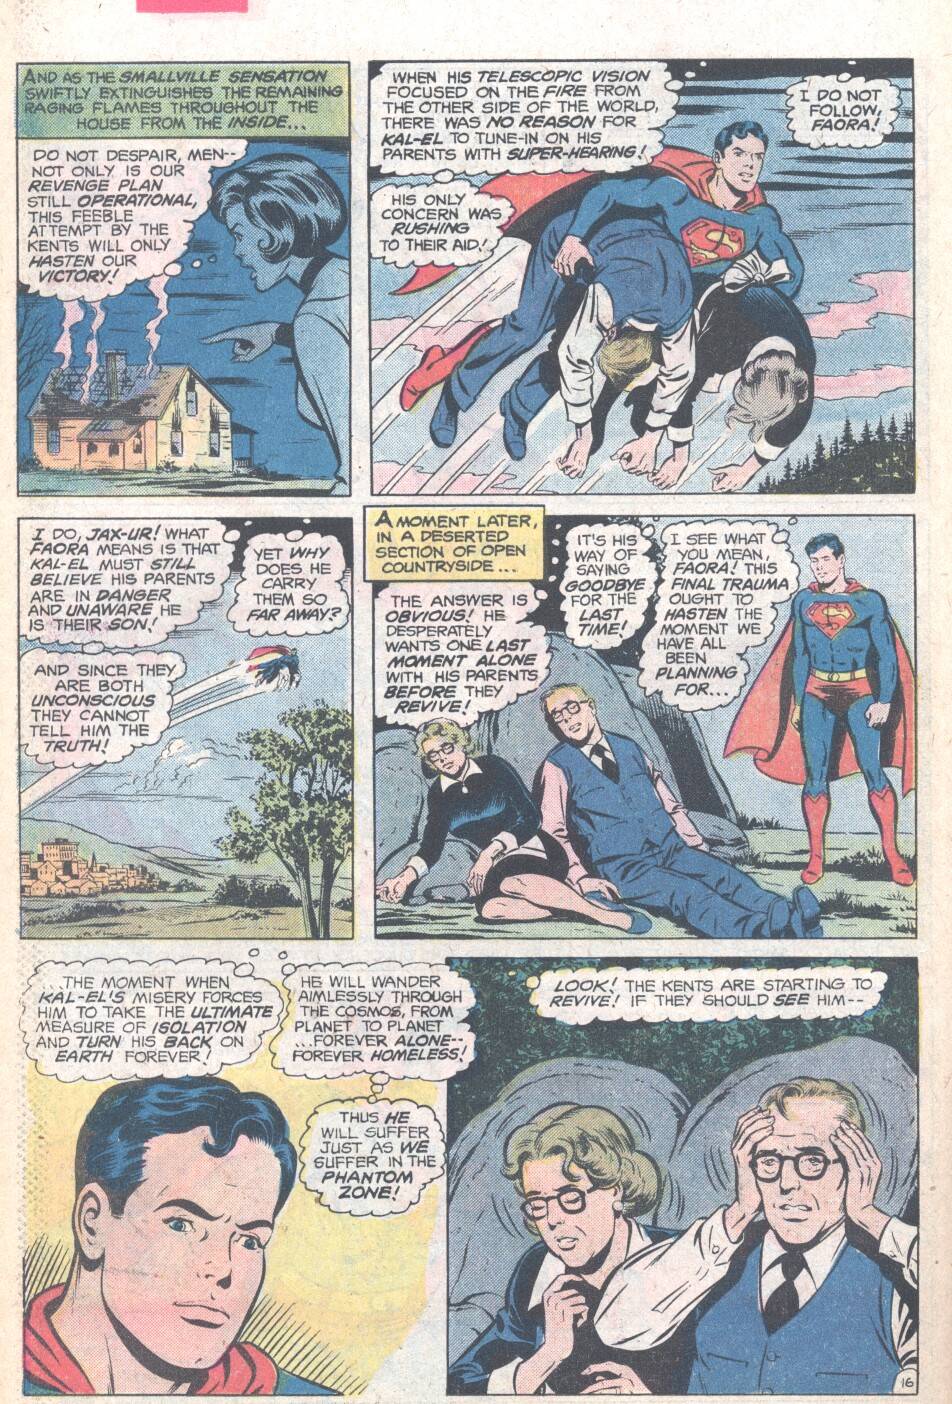 The New Adventures of Superboy 9 Page 16